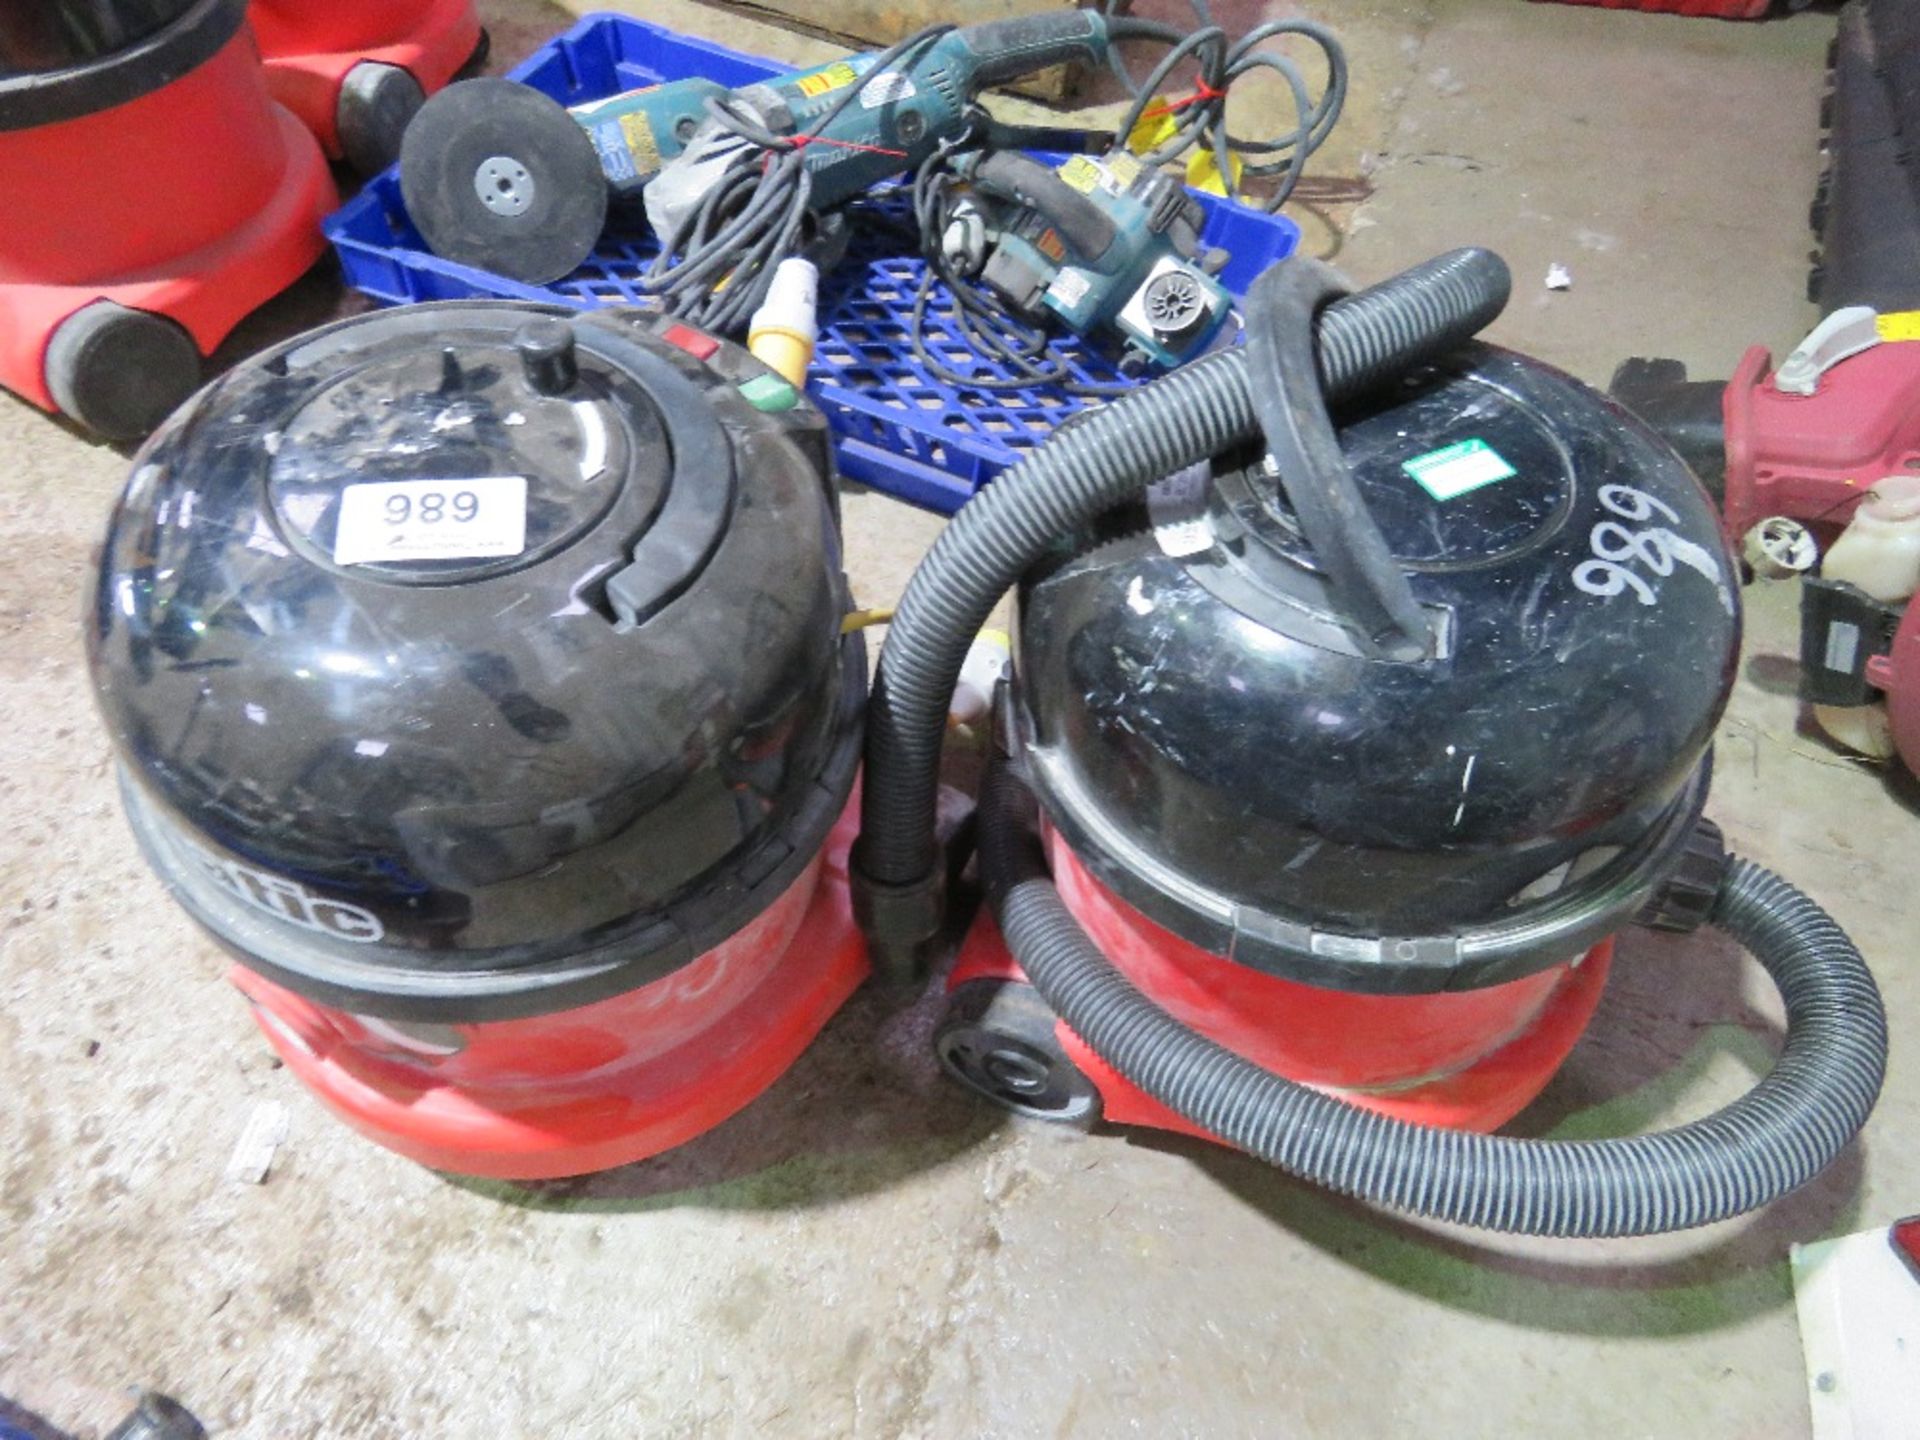 2 X NUMATIC 110VOLT VACUUM CLEANERS. SOURCED FROM COMPANY LIQUIDATION. THIS LOT IS SOLD UNDER THE AU - Image 2 of 3